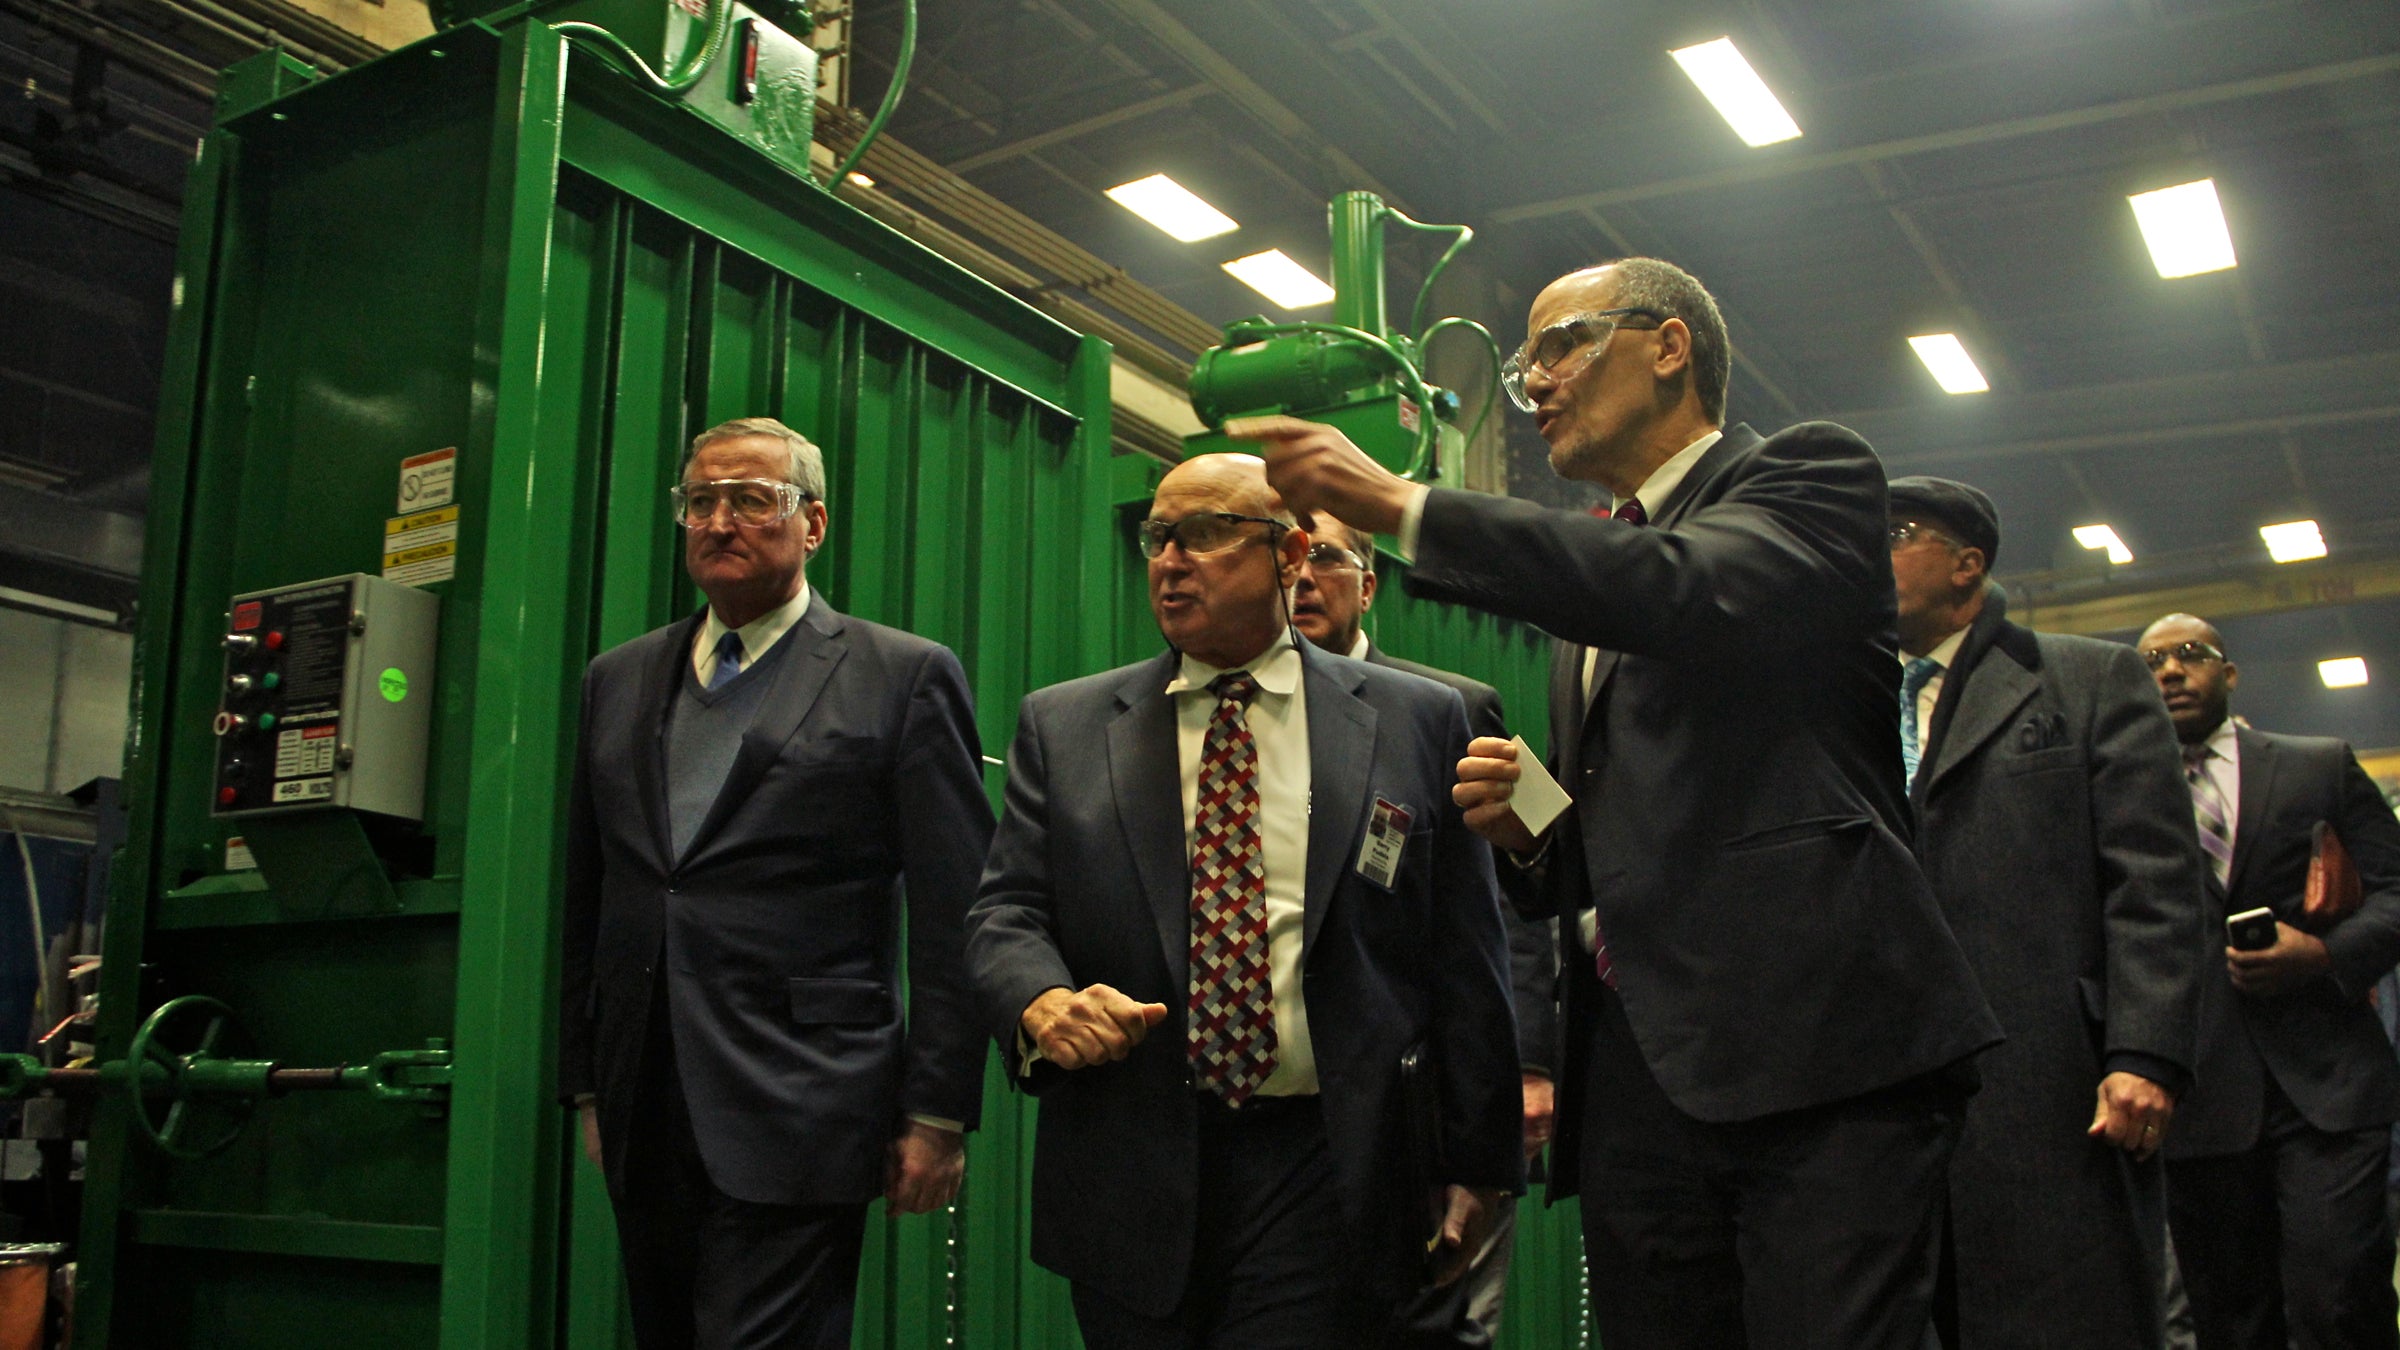  U.S. Secretary of Labor Thomas E. Perez (center) tours  PTR Baler & Compactor in Port Richmond with Philadelphia Mayor Jim Kenney (left) and other dignitaries. (Emma Lee/WHYY) 